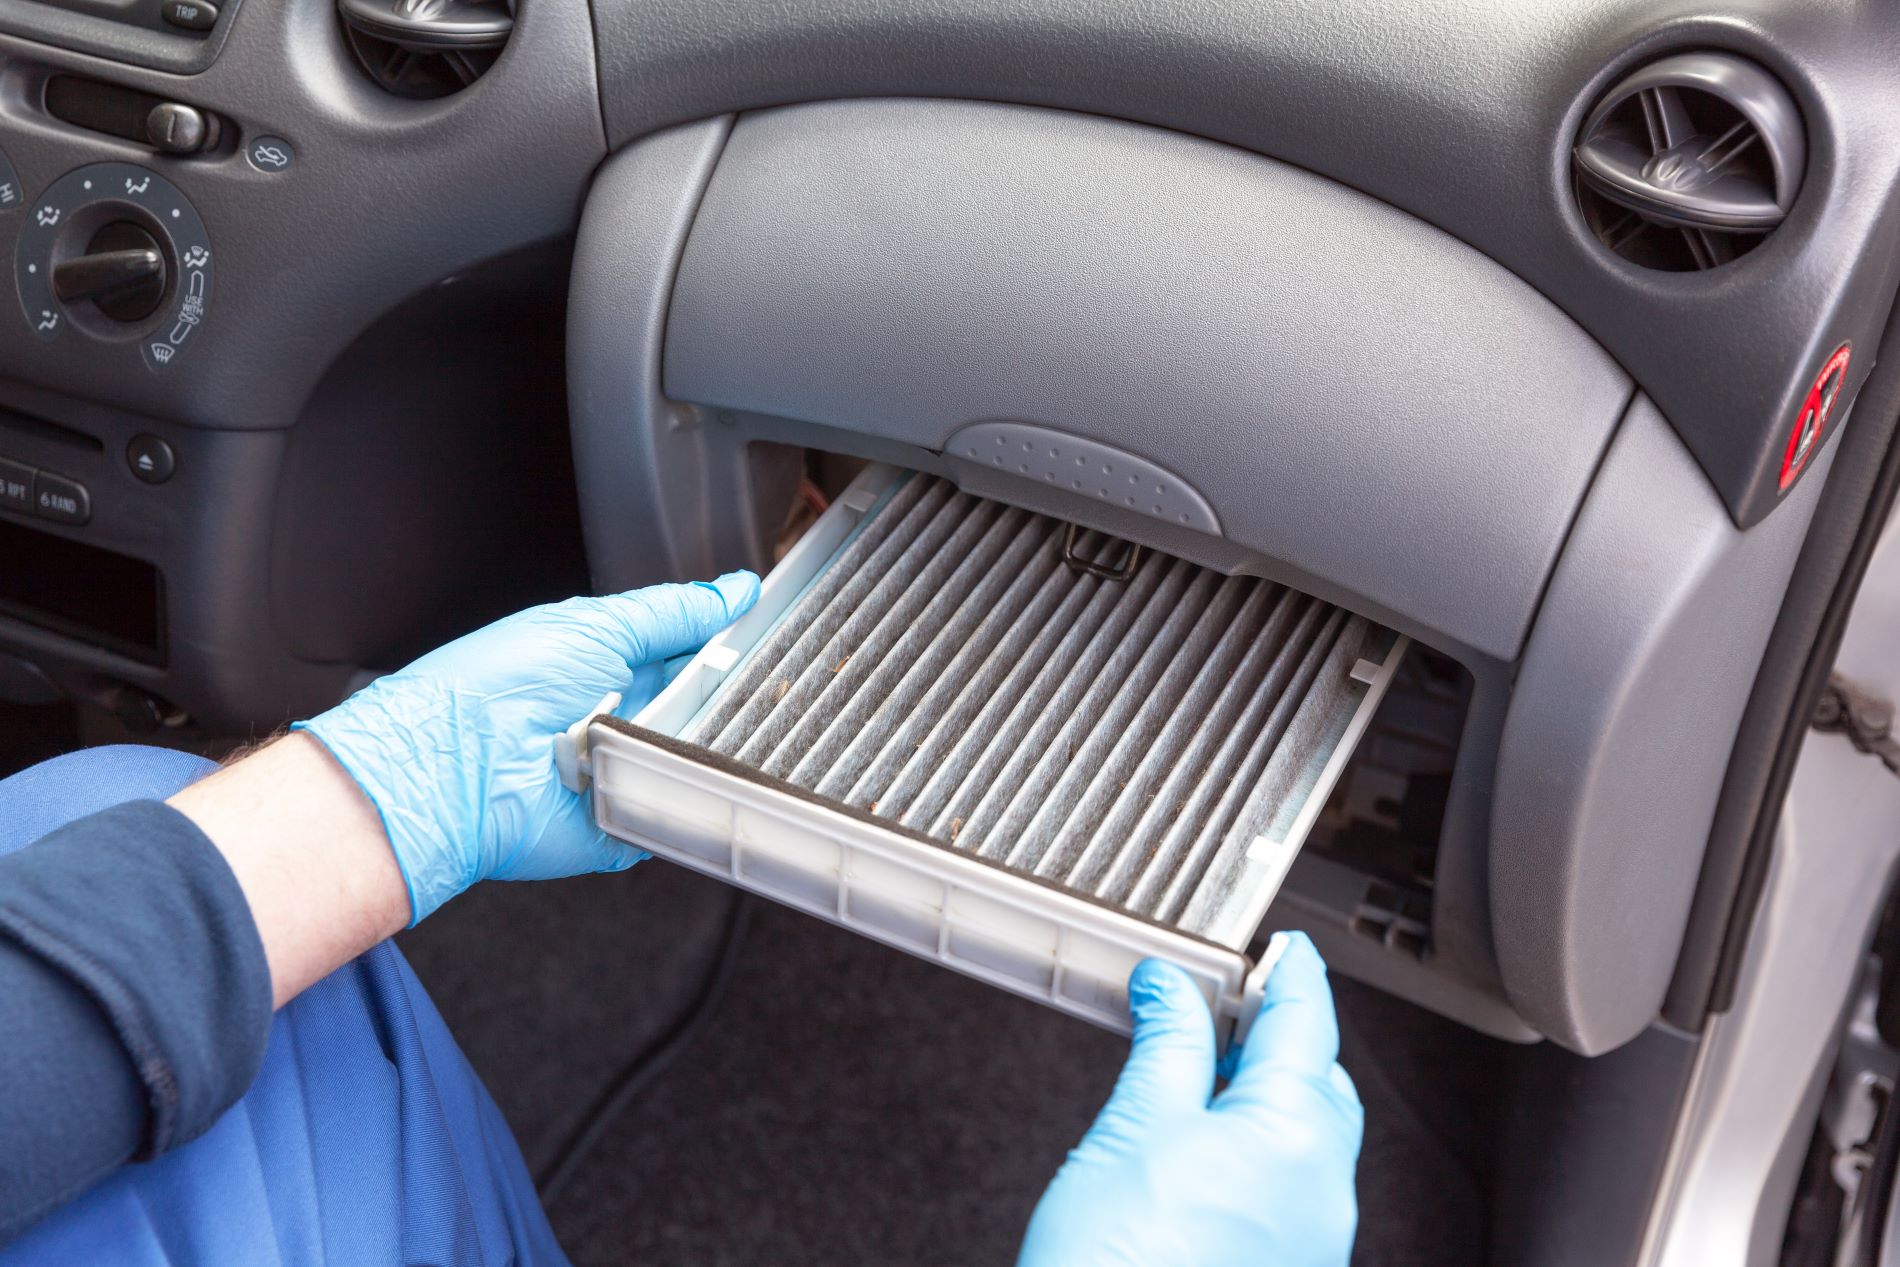 Warning signs of a damaged air filter, Air filter housing, A dirt car air filter can reduce the coolness of your car air and prevent clean air from coming in